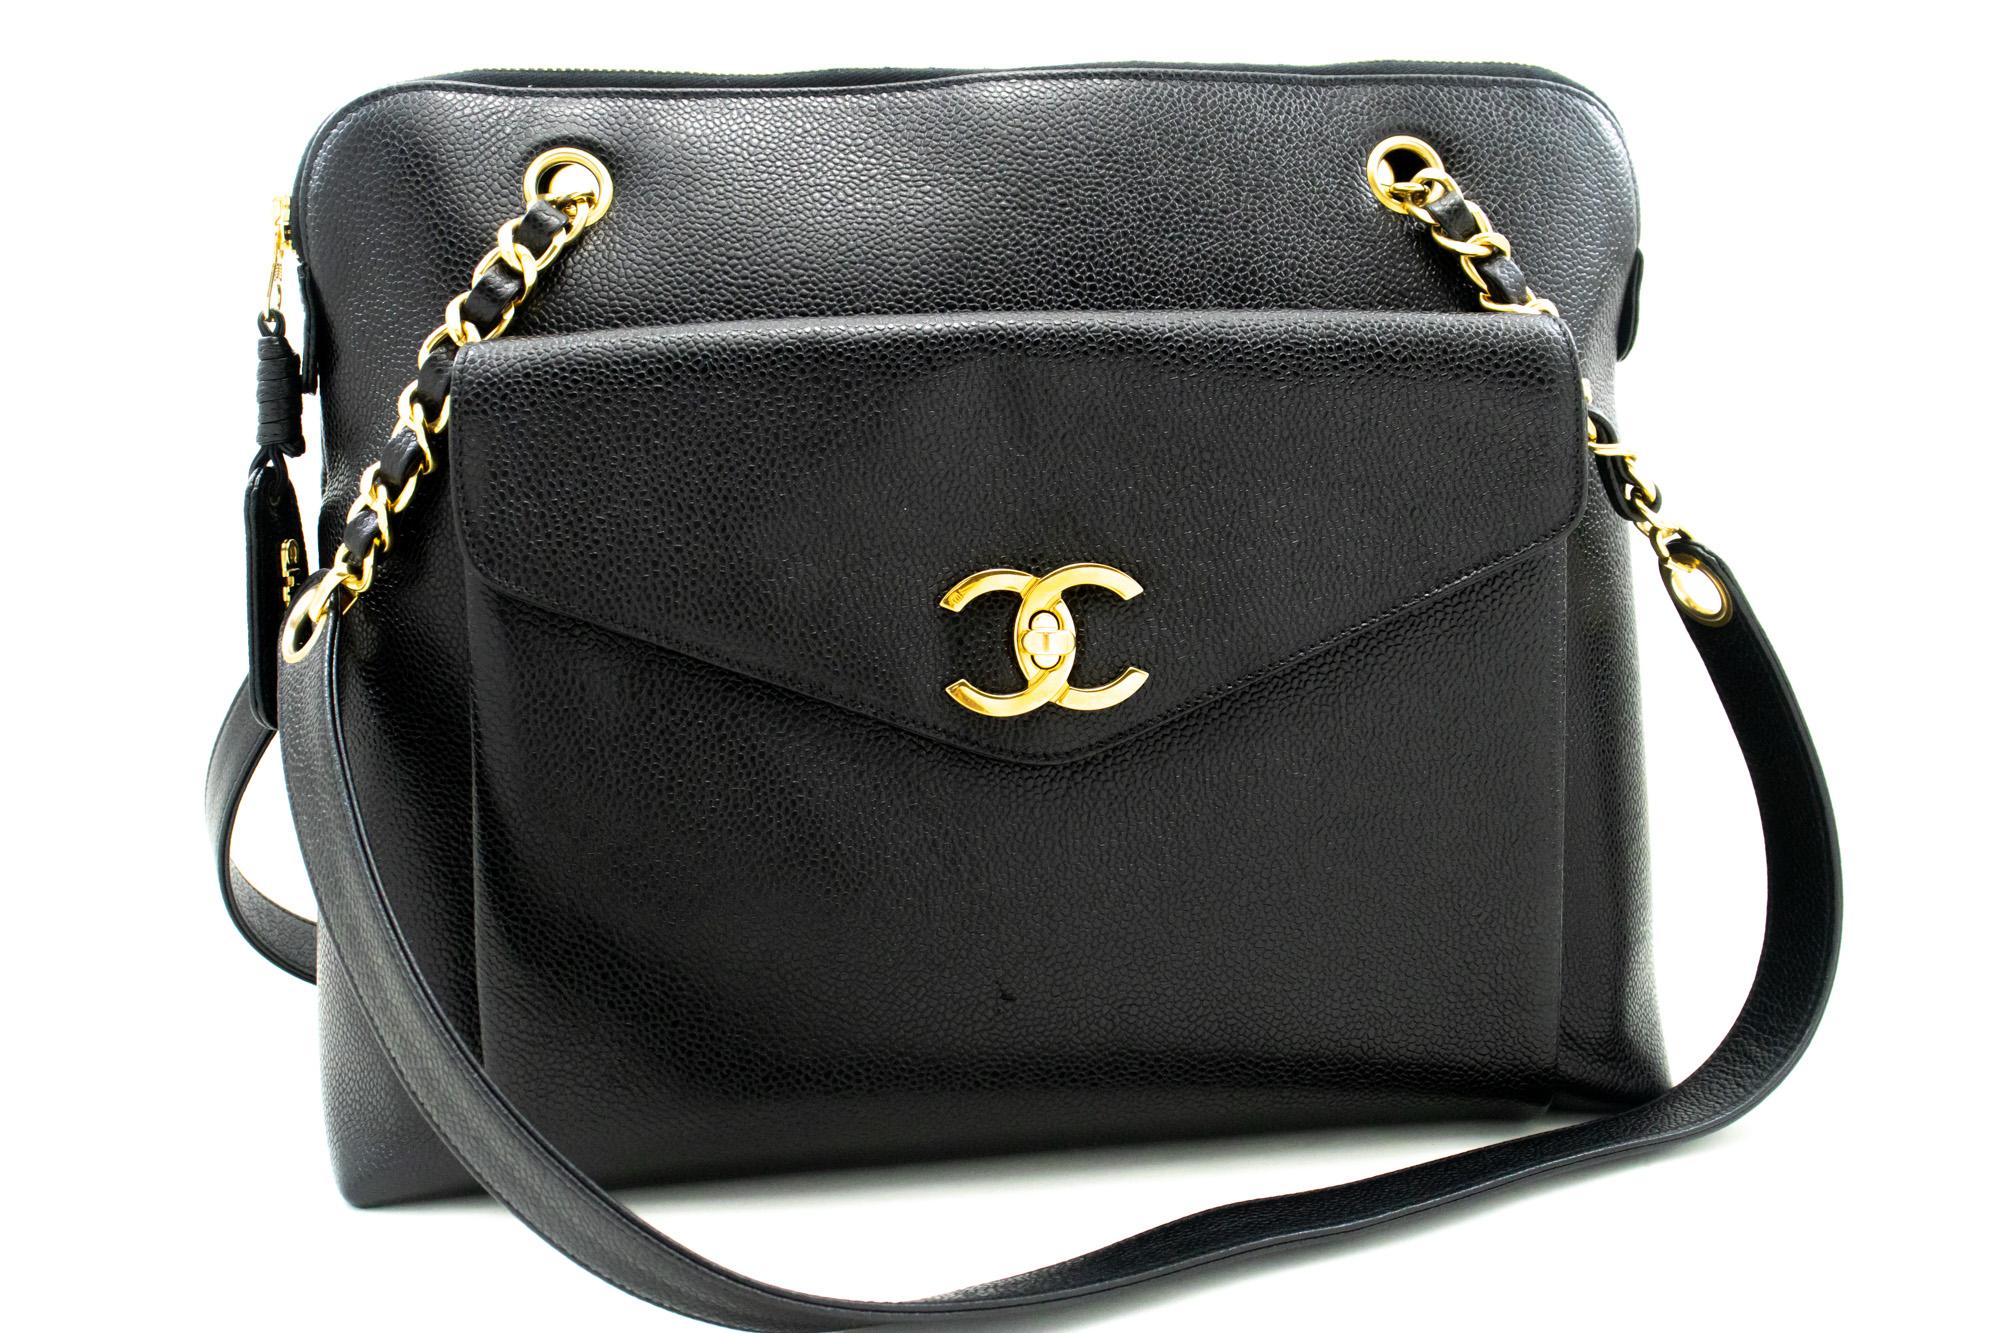 An authentic CHANEL Caviar Large Chain Shoulder Bag Black Leather Gold Zipper. The color is Black. The outside material is Leather. The pattern is Solid. This item is Vintage / Classic. The year of manufacture would be 1994-1996.
Conditions &